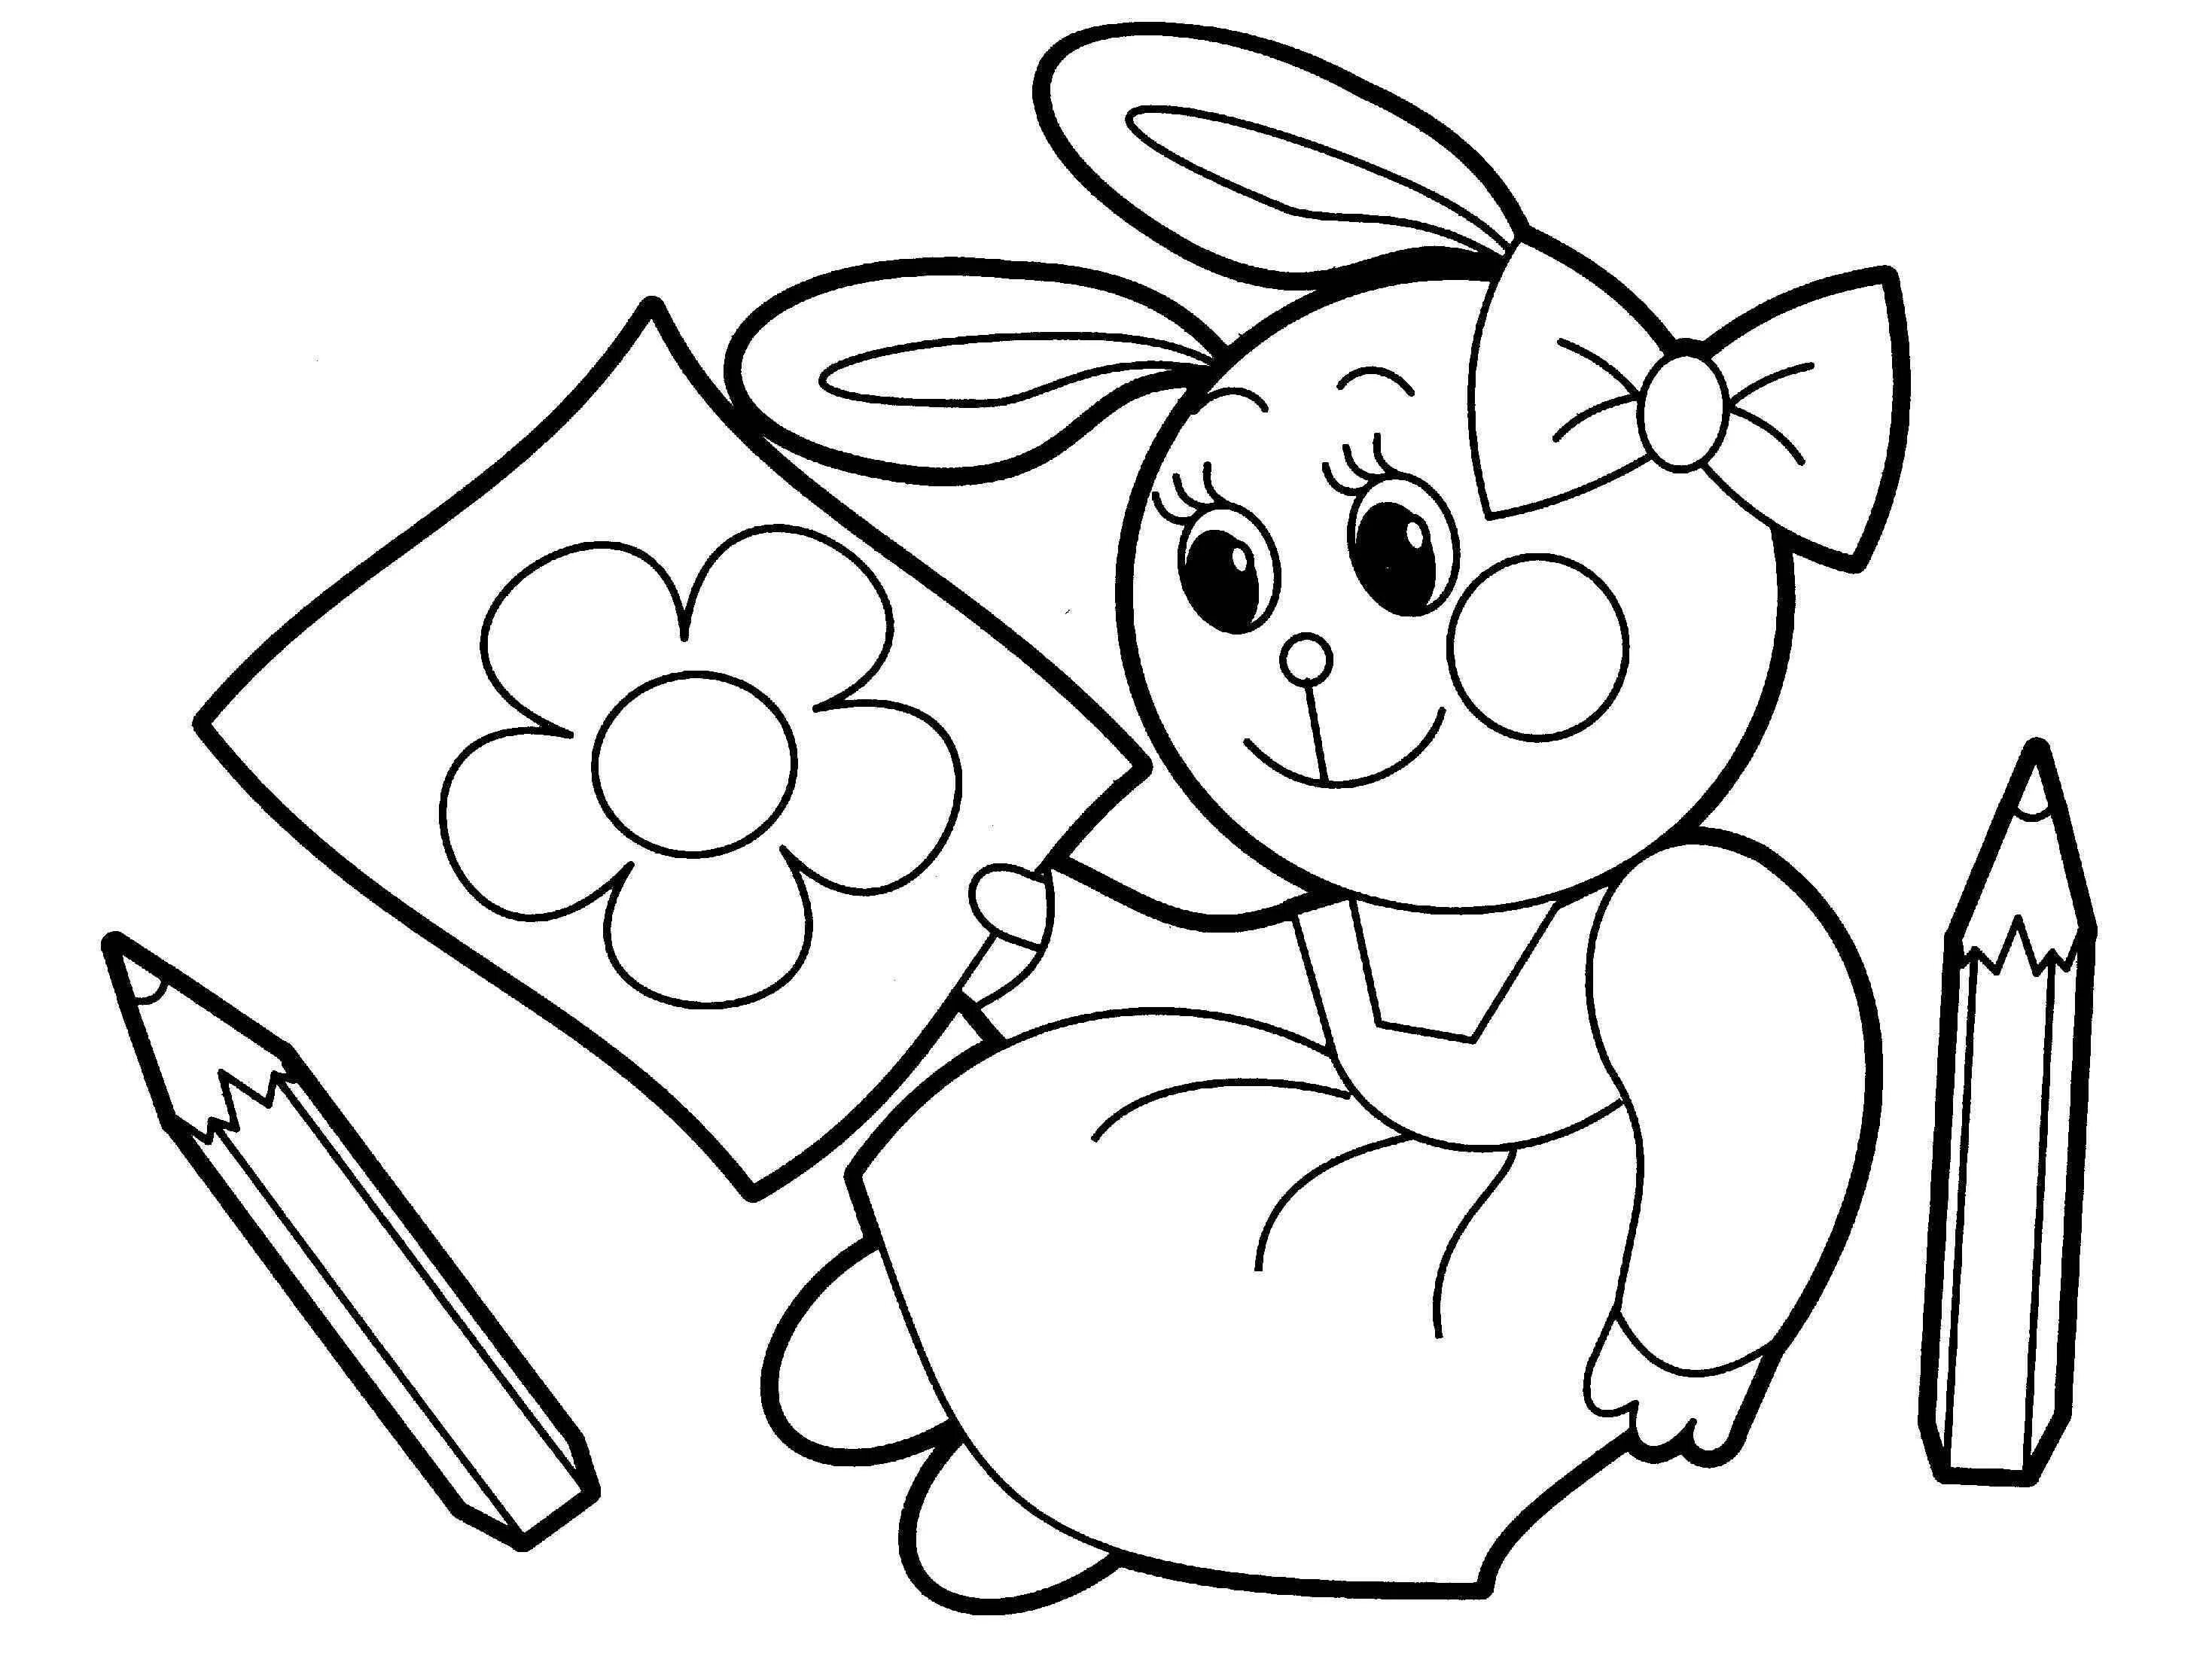 Online store irresistible coloring page